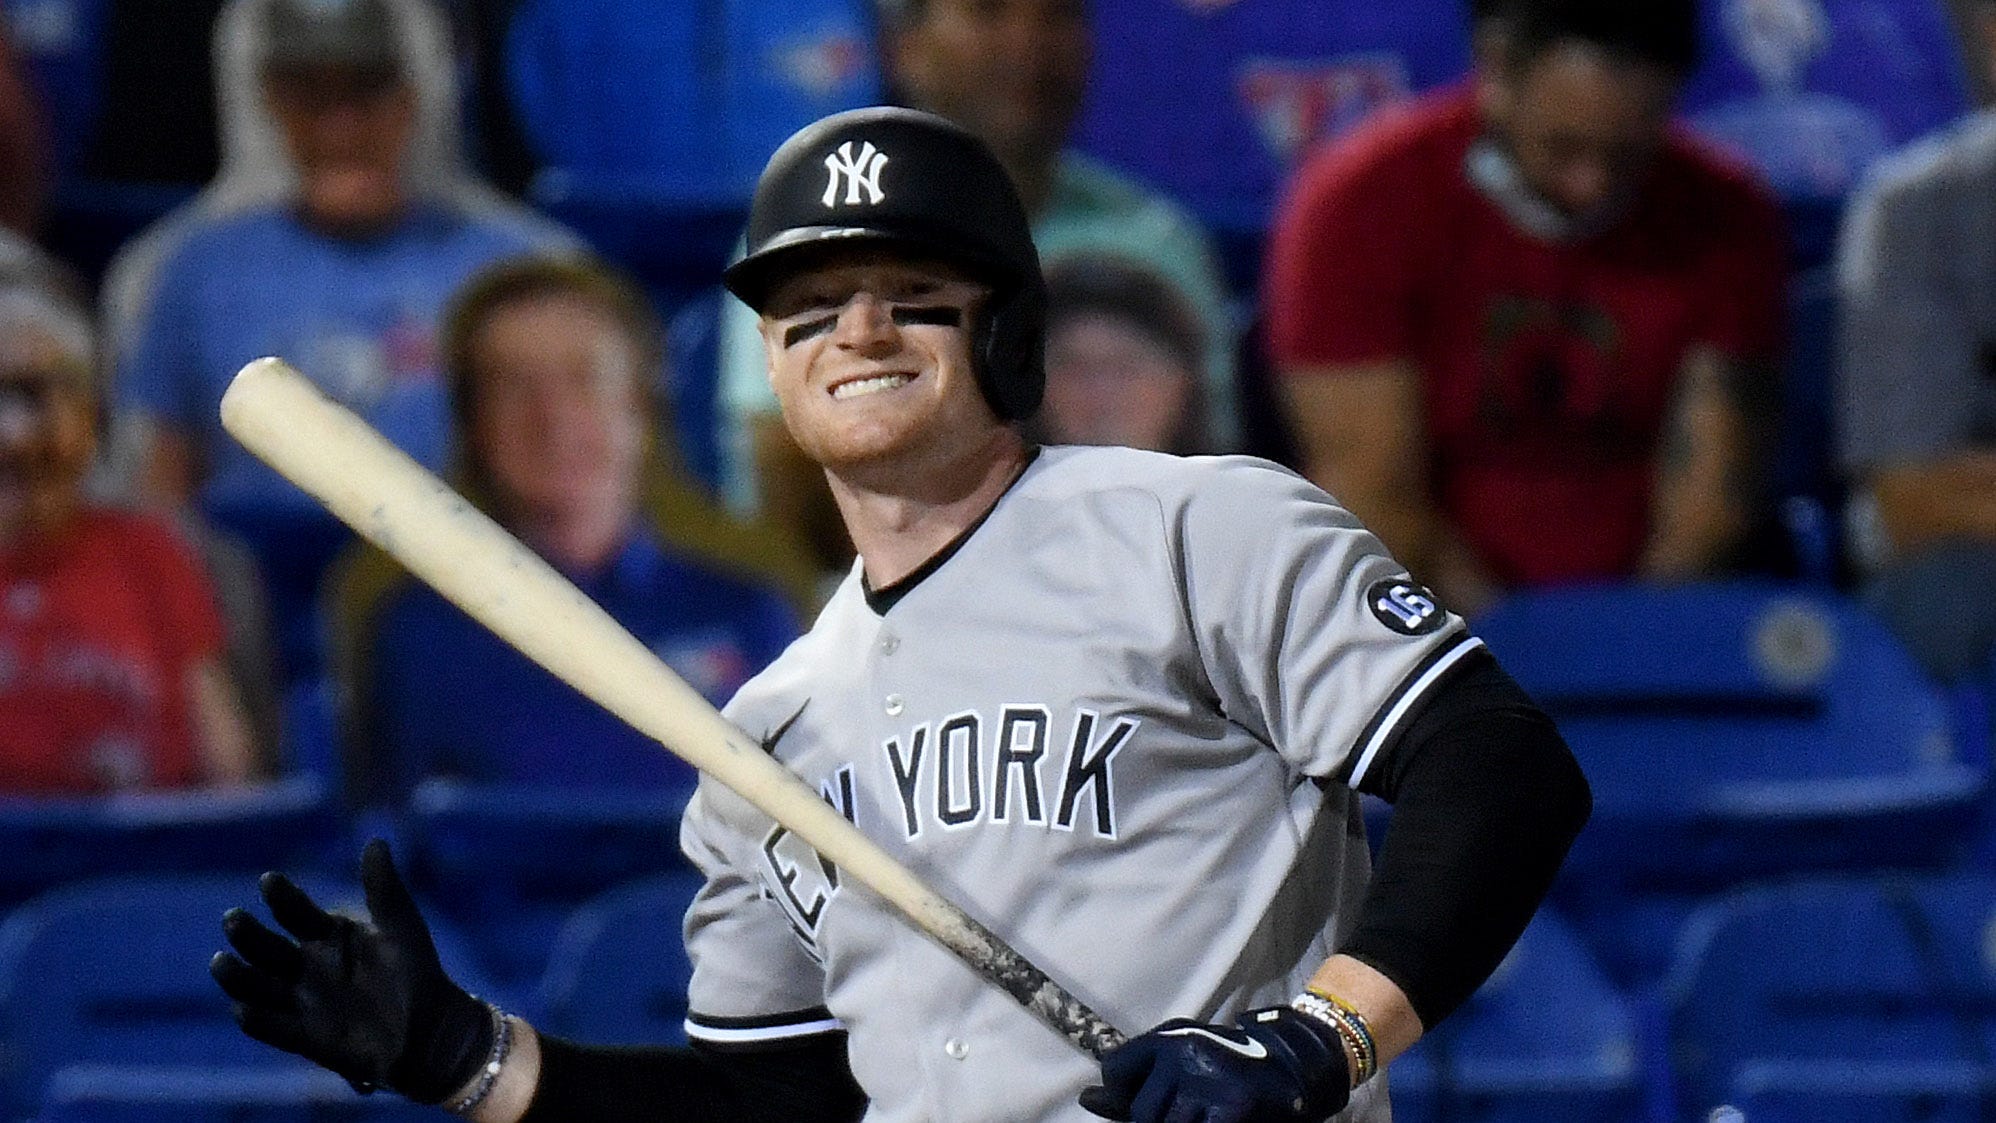 Clint Frazier - MLB Left field - News, Stats, Bio and more - The Athletic